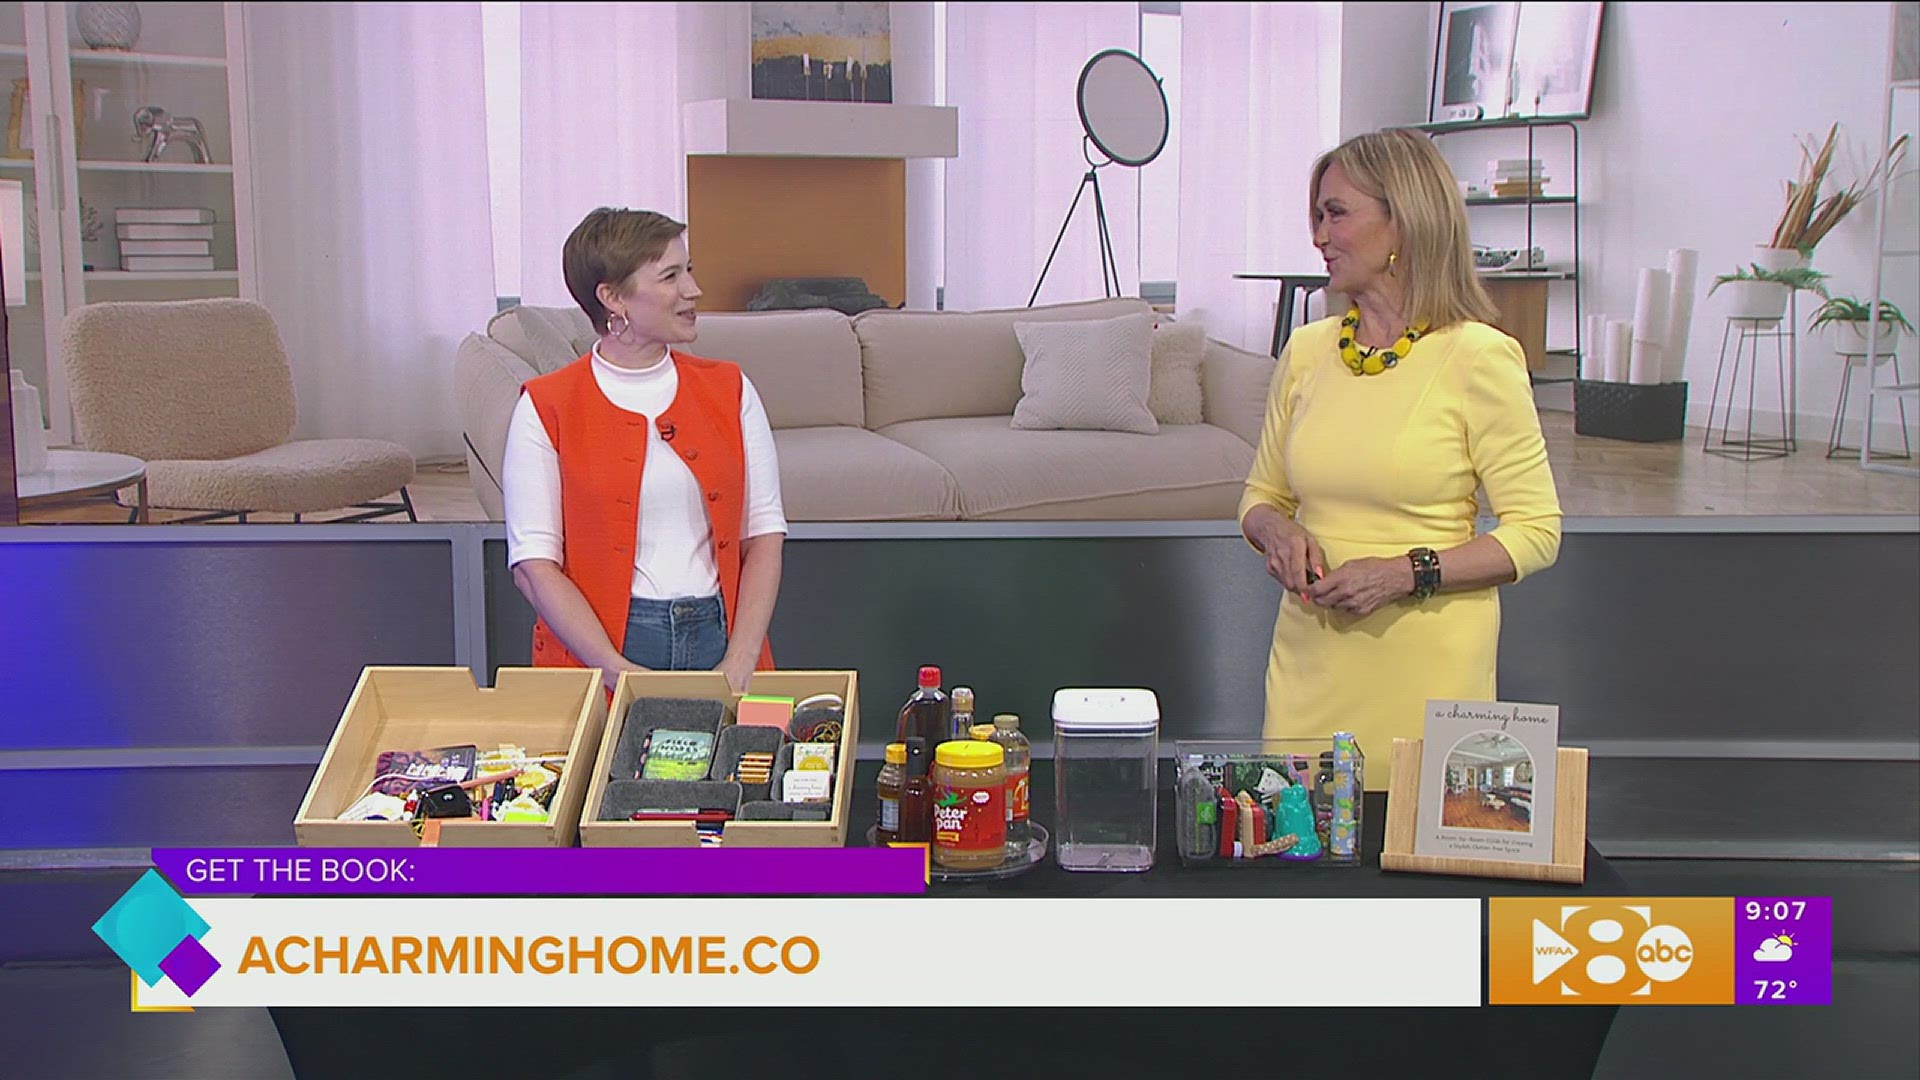 "A Charming Home" author Jessie Carrillo shares tips & strategies to improve the functionality of the spaces in your home. Go to acharminghome.co for more info.